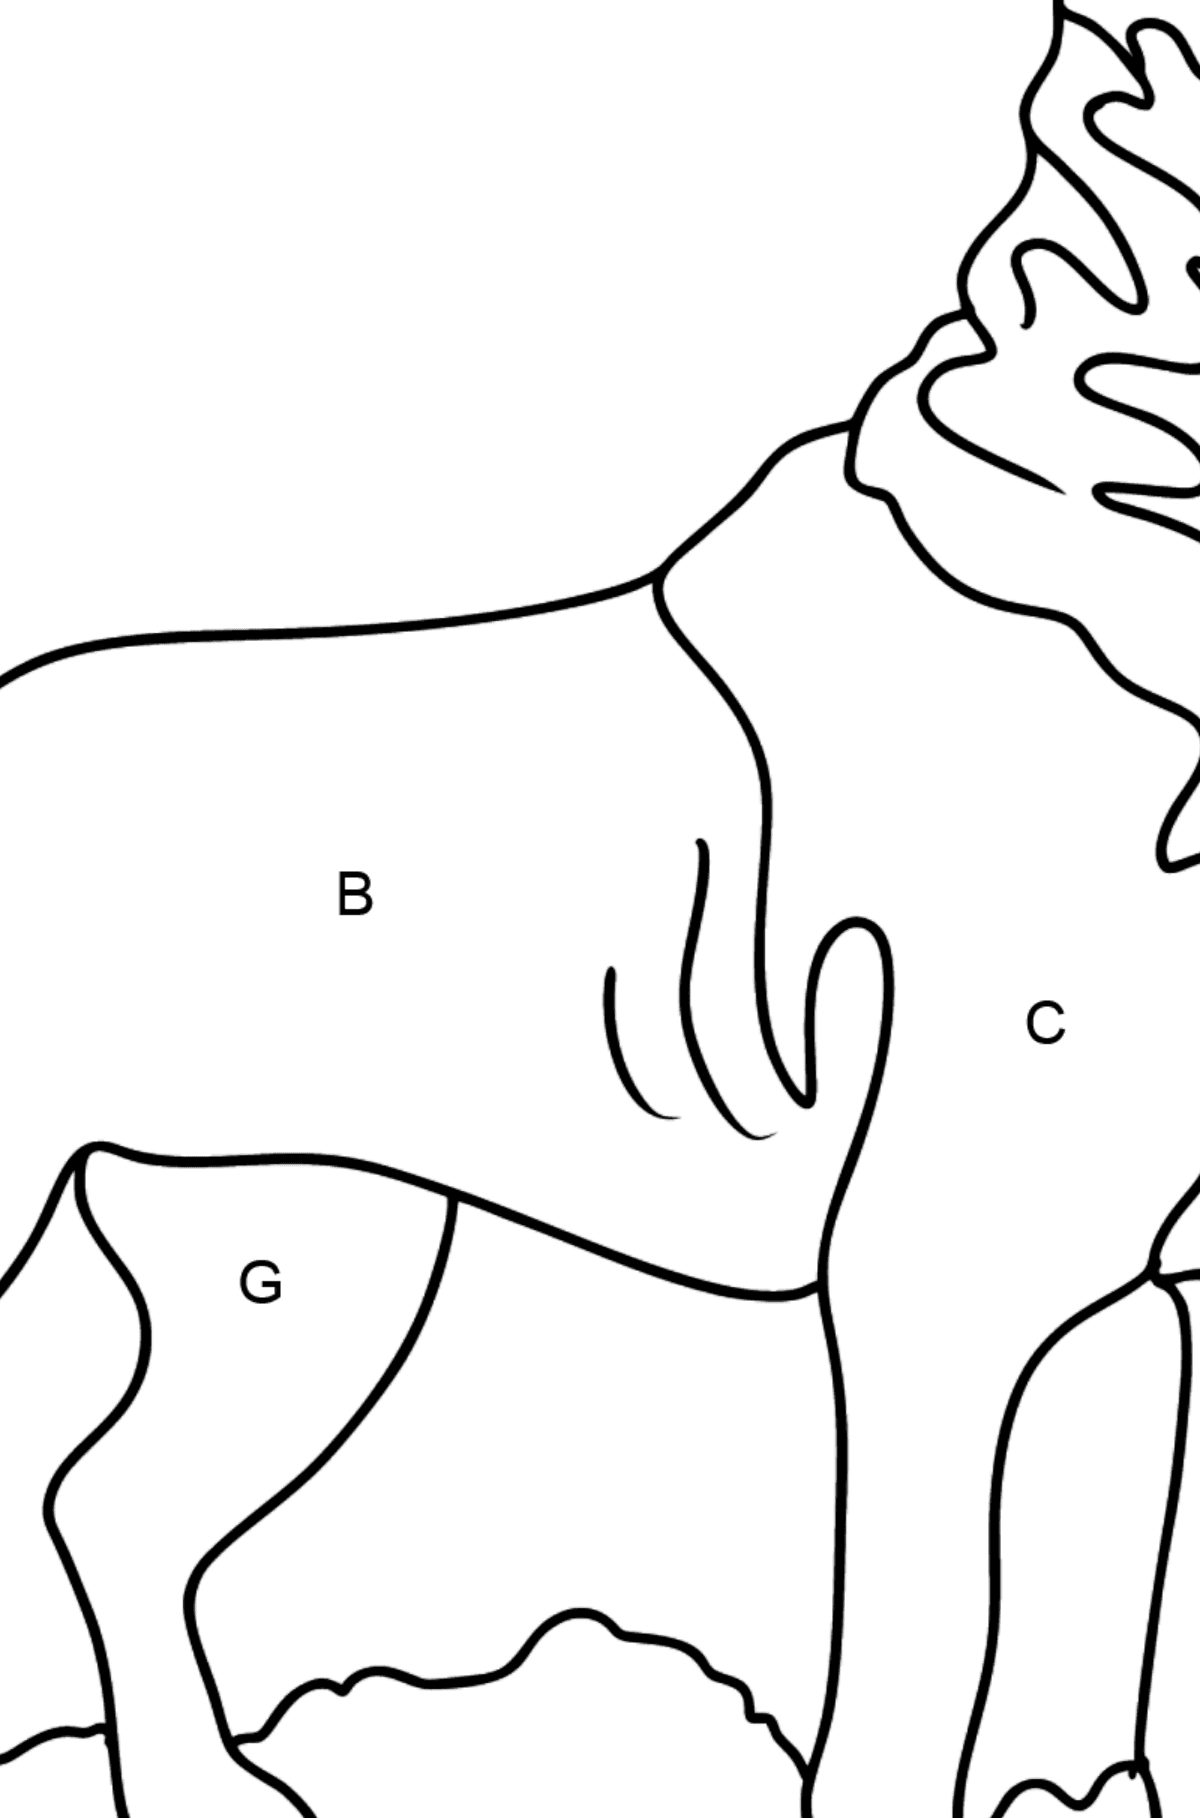 Rottweiler coloring page - Coloring by Letters for Kids